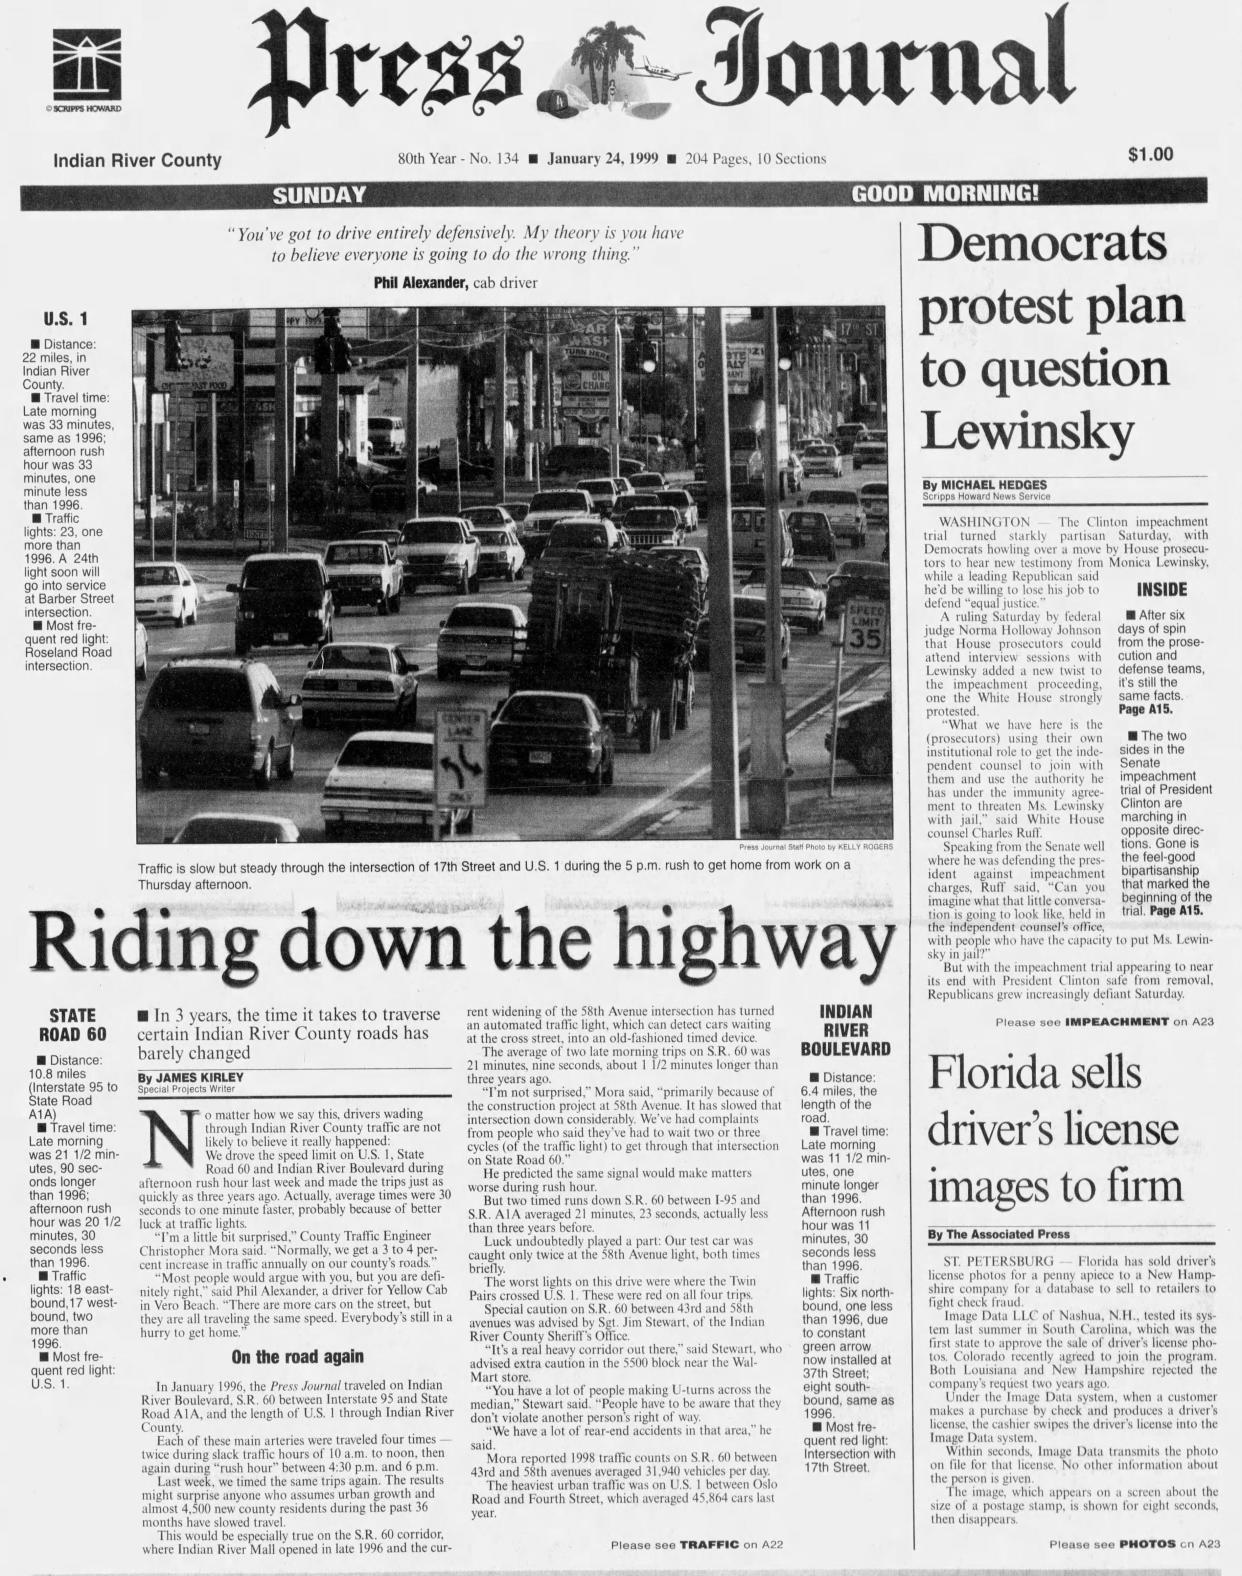 Press Journal reporter James Kirley timed trips along key Indian River County roadways for a story published Jan. 24, 1999. It followed up one he'd done in 1996.